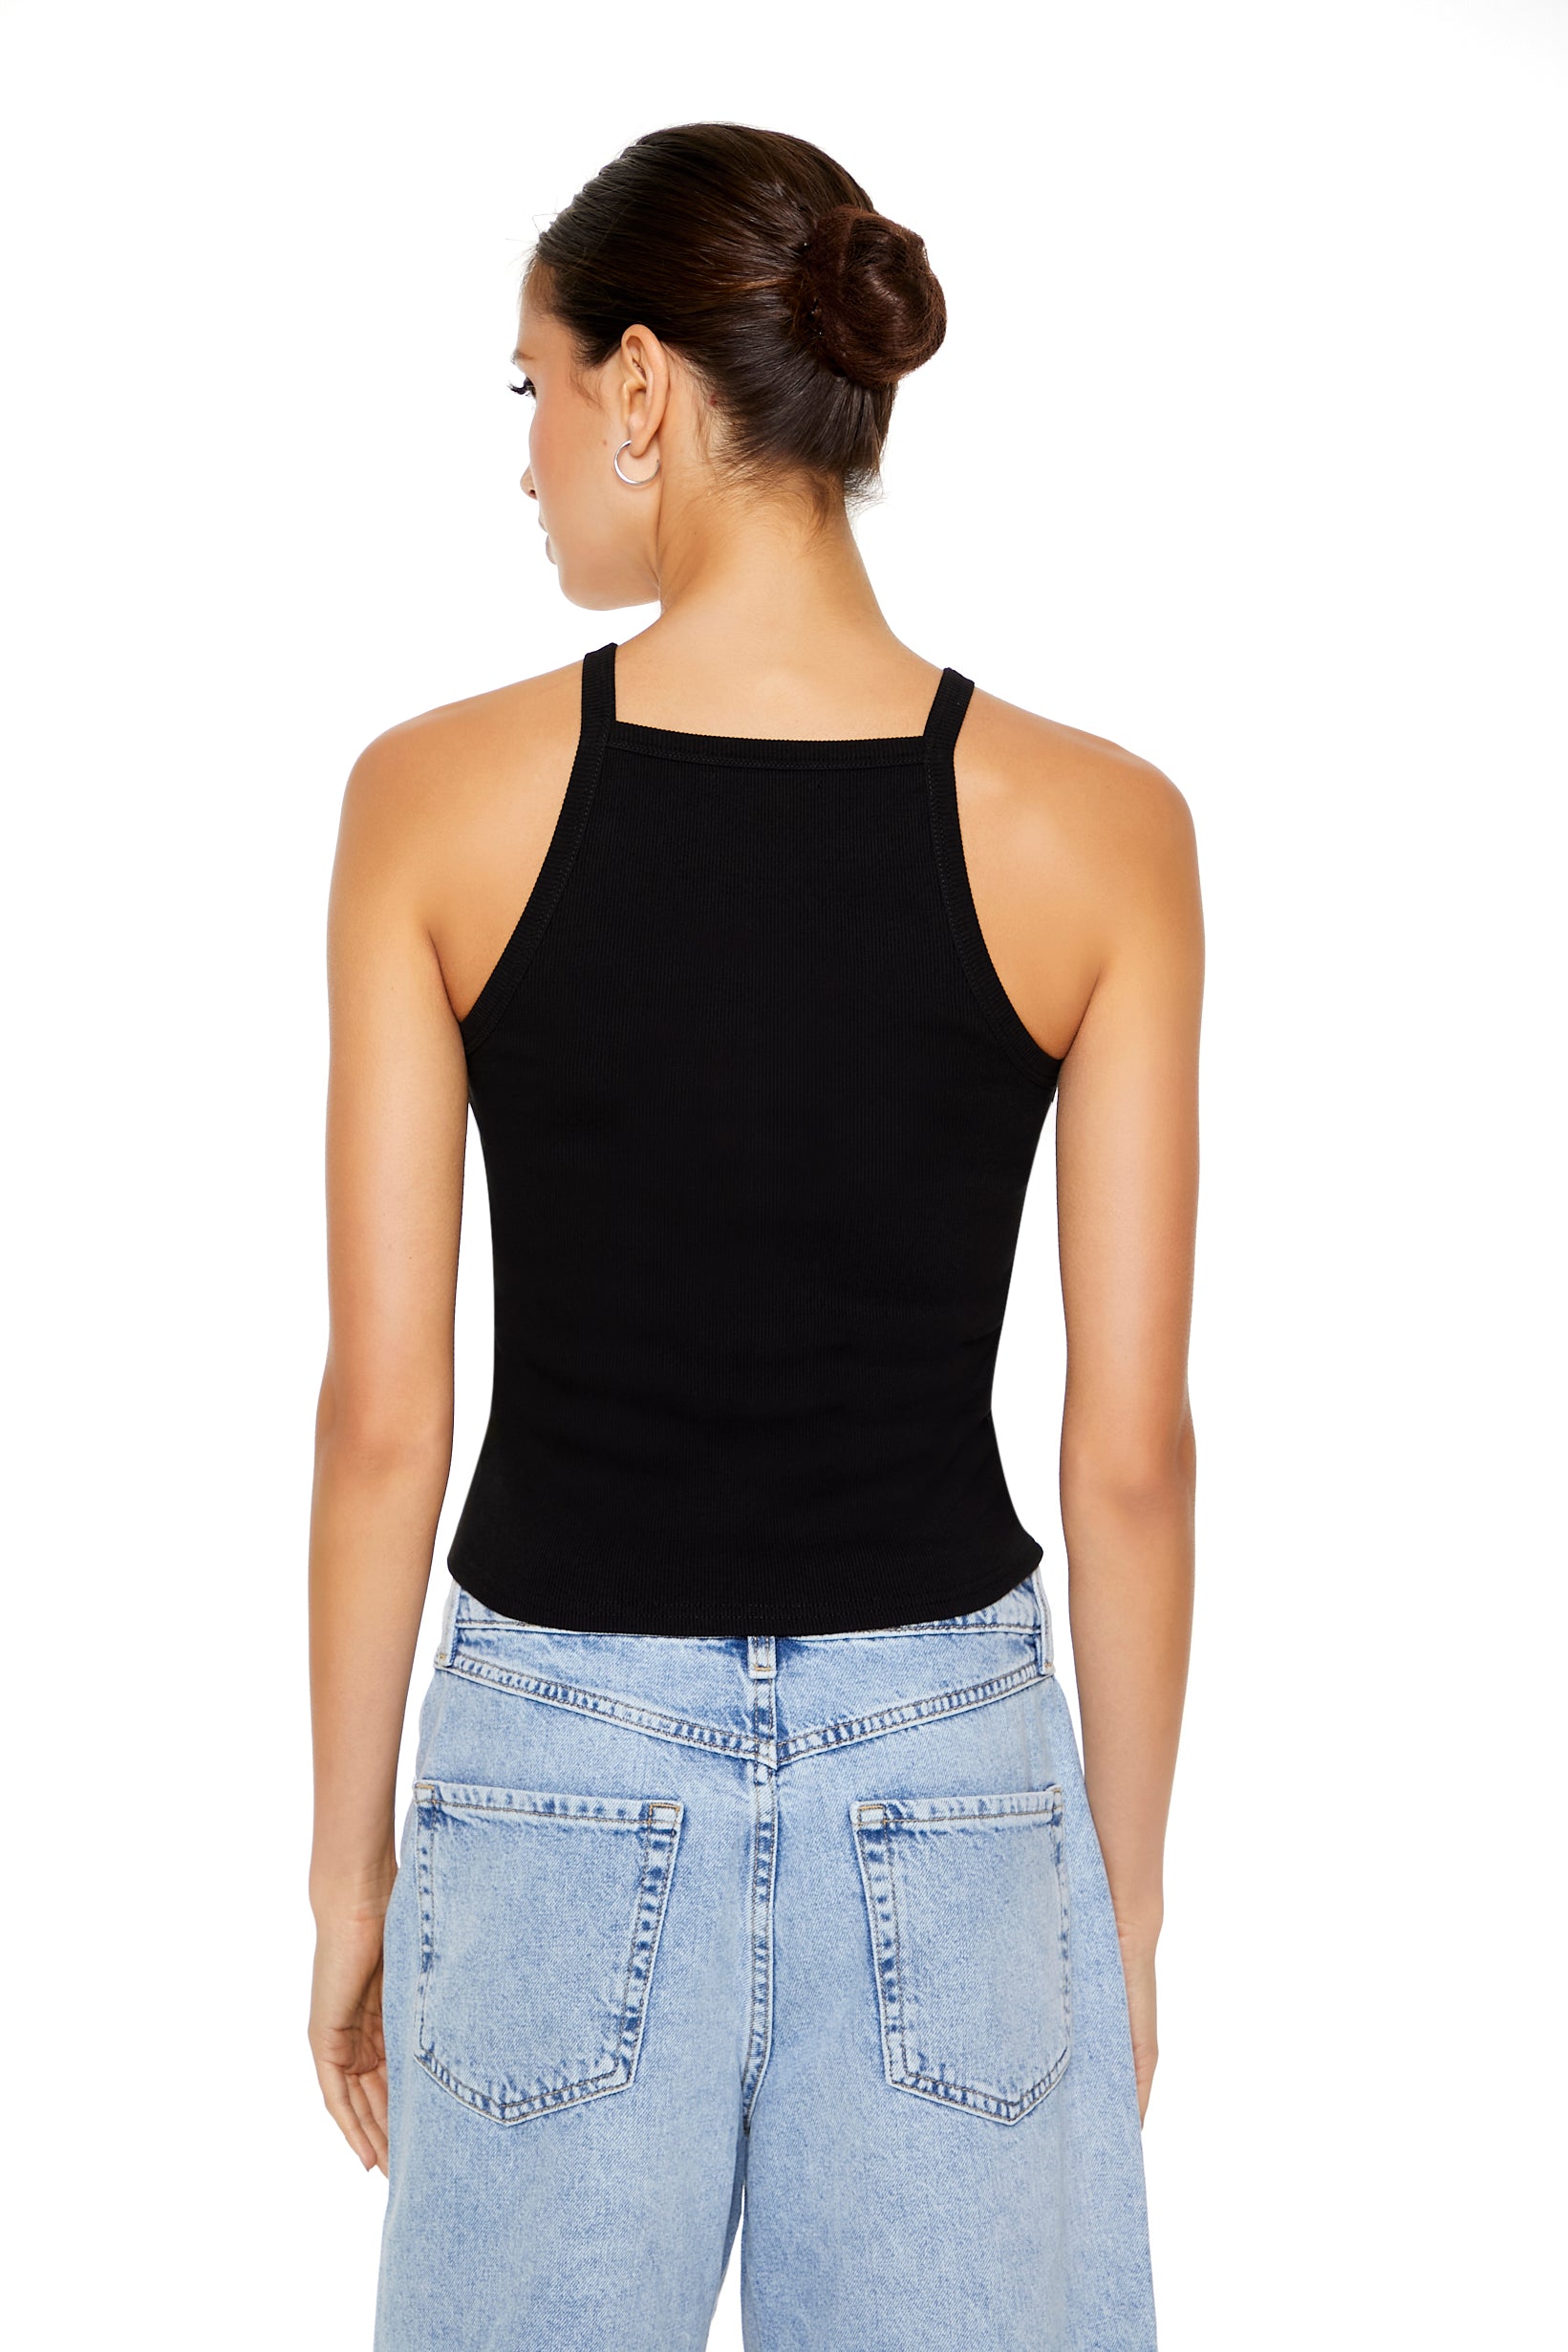 Taurus Embroidered Cropped Cami